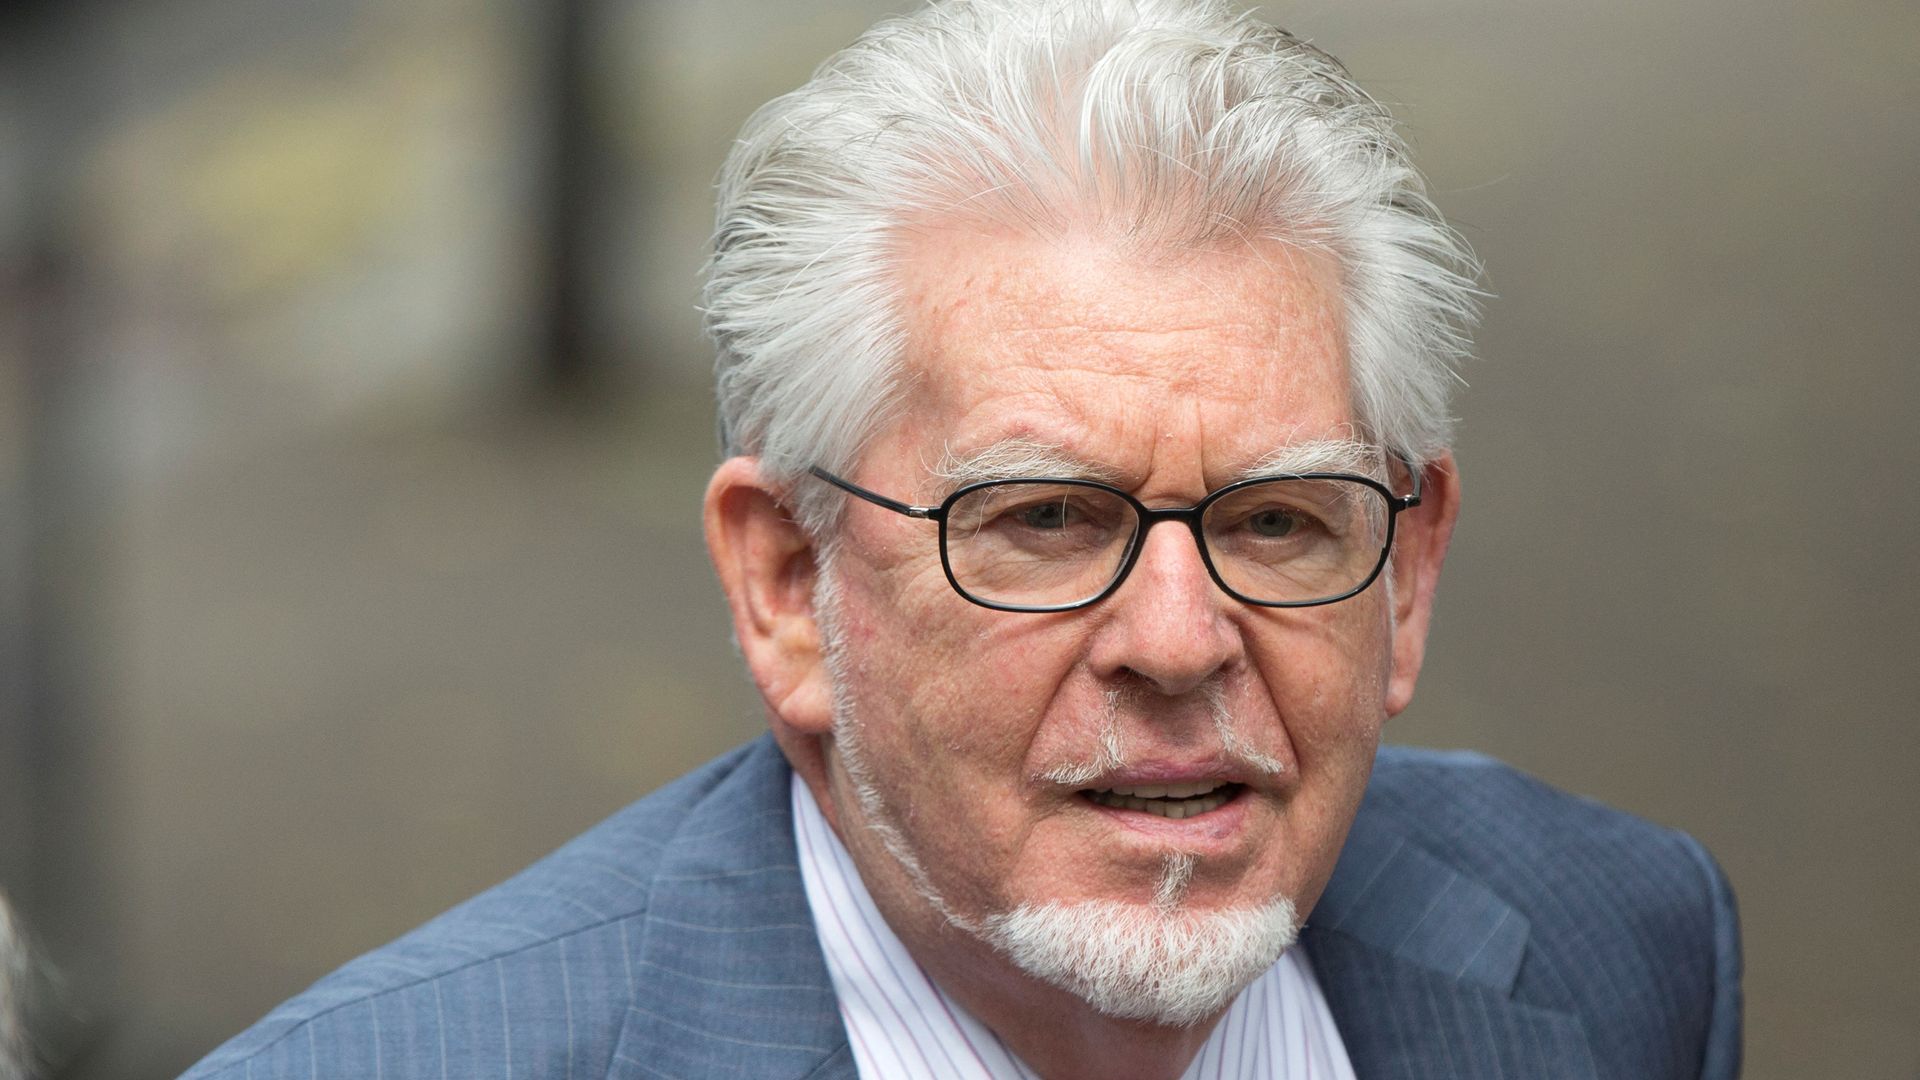 Blue Peter presenter says she was sexually assaulted by Rolf Harris...